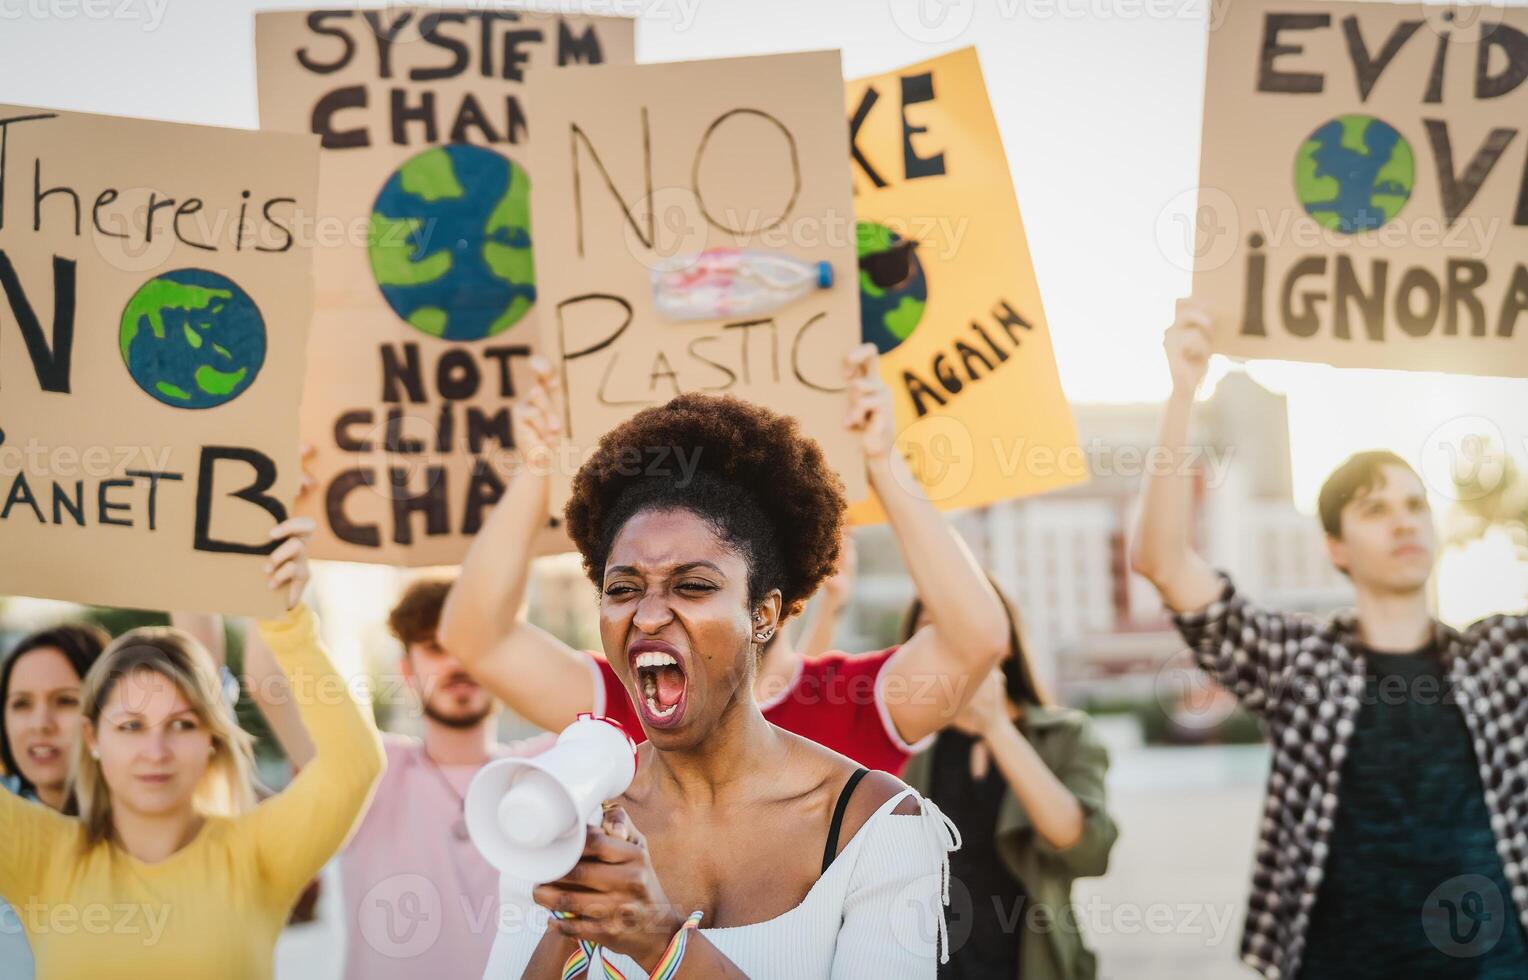 Demonstrators group protesting against plastic pollution and climate change - Multiracial people fighting on road holding banners on environments disasters - Global warming concept photo